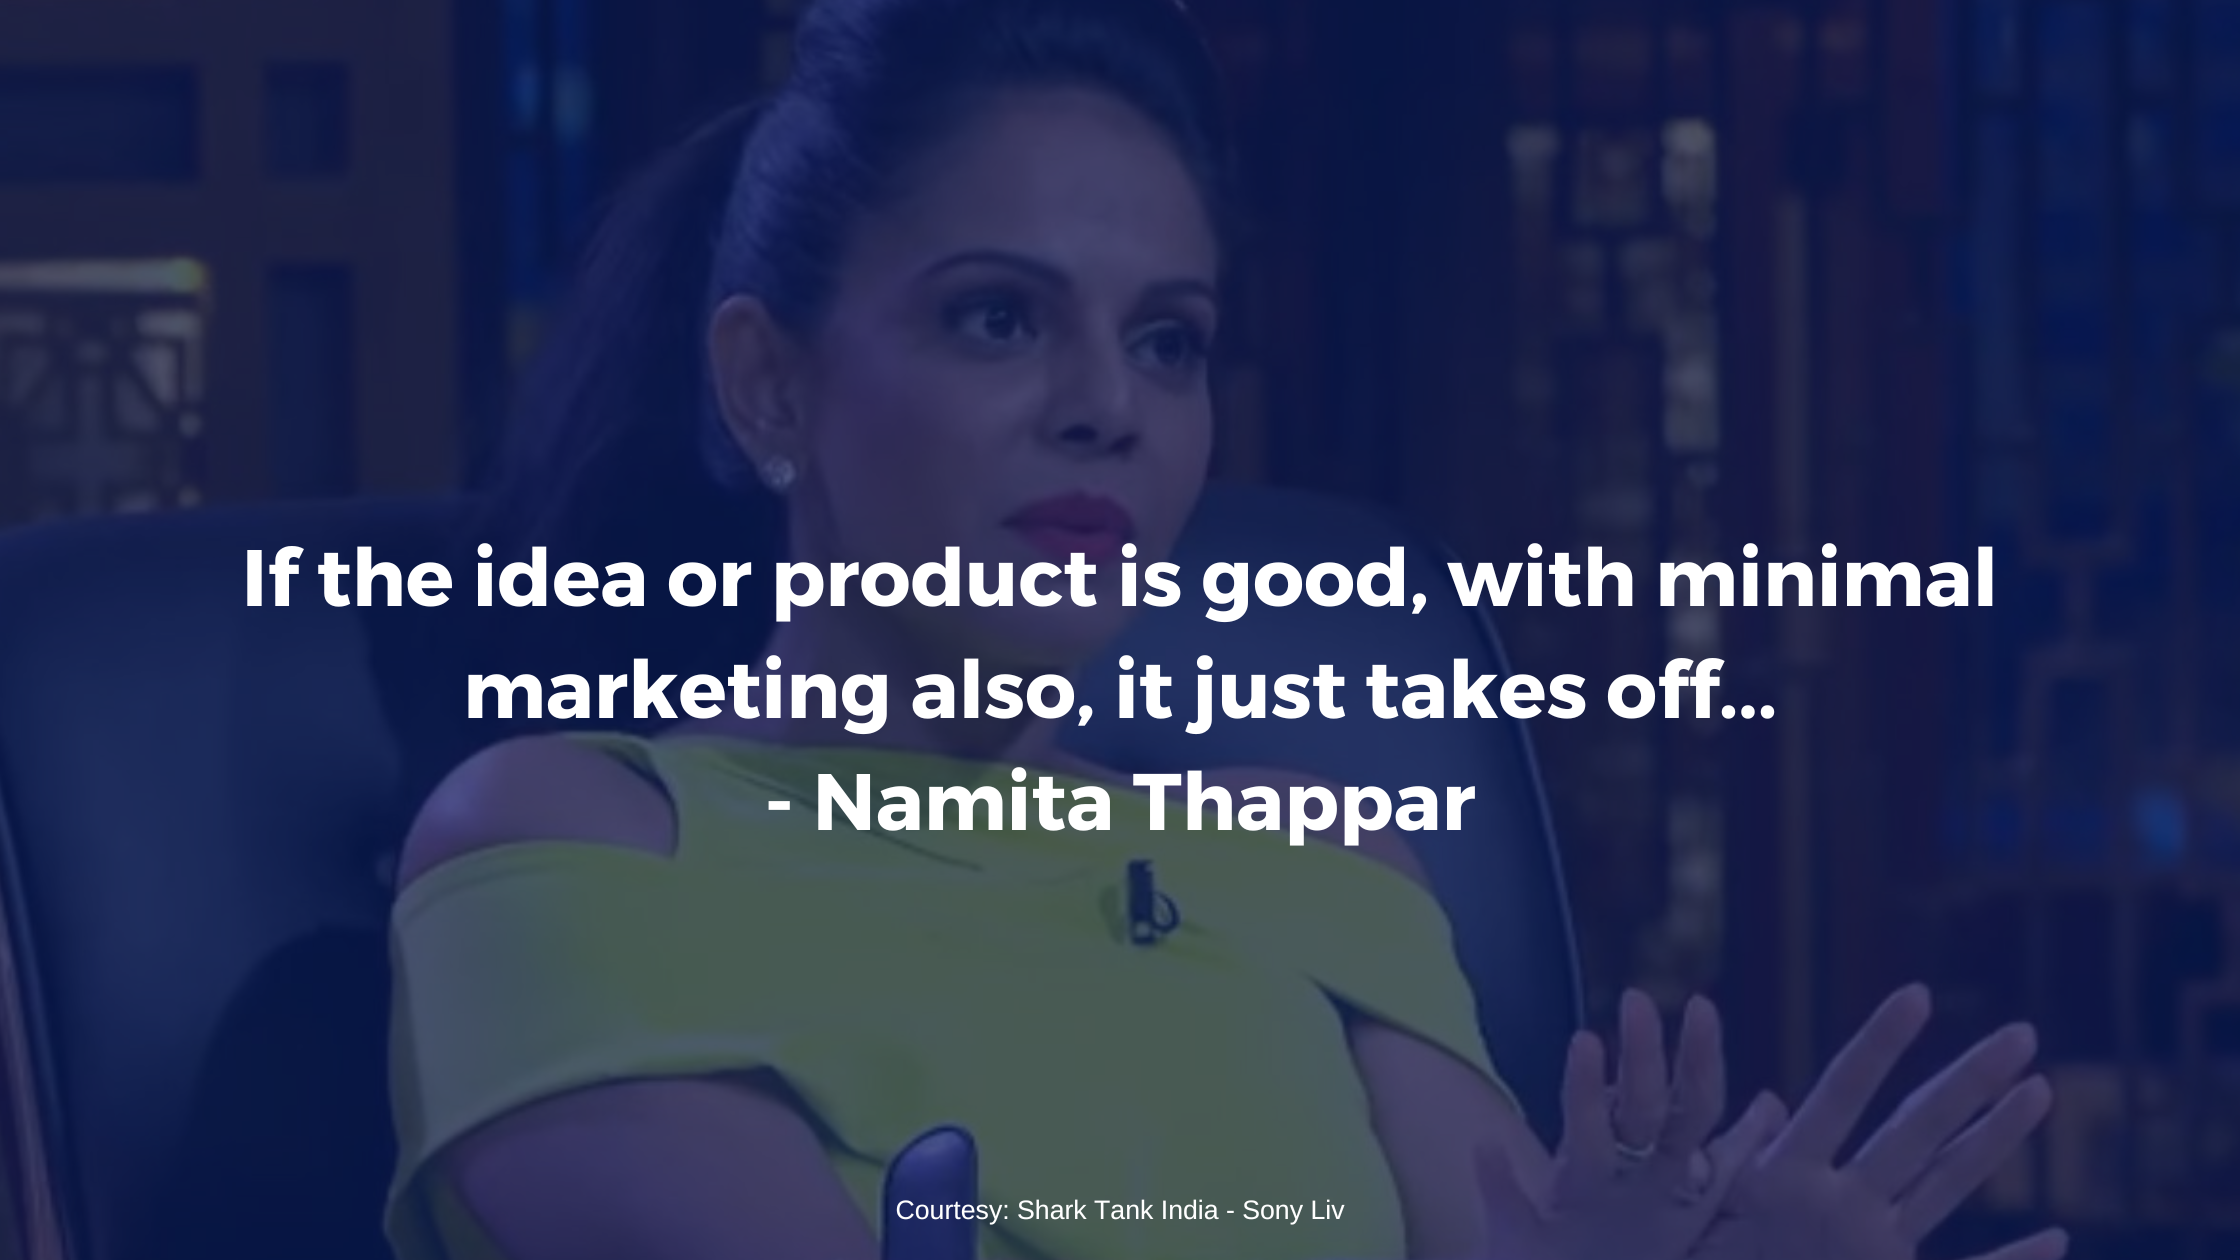 If the idea or product is good, with minimal marketing also, it just takes off... - Namita Thappar - Imitation Jewlery